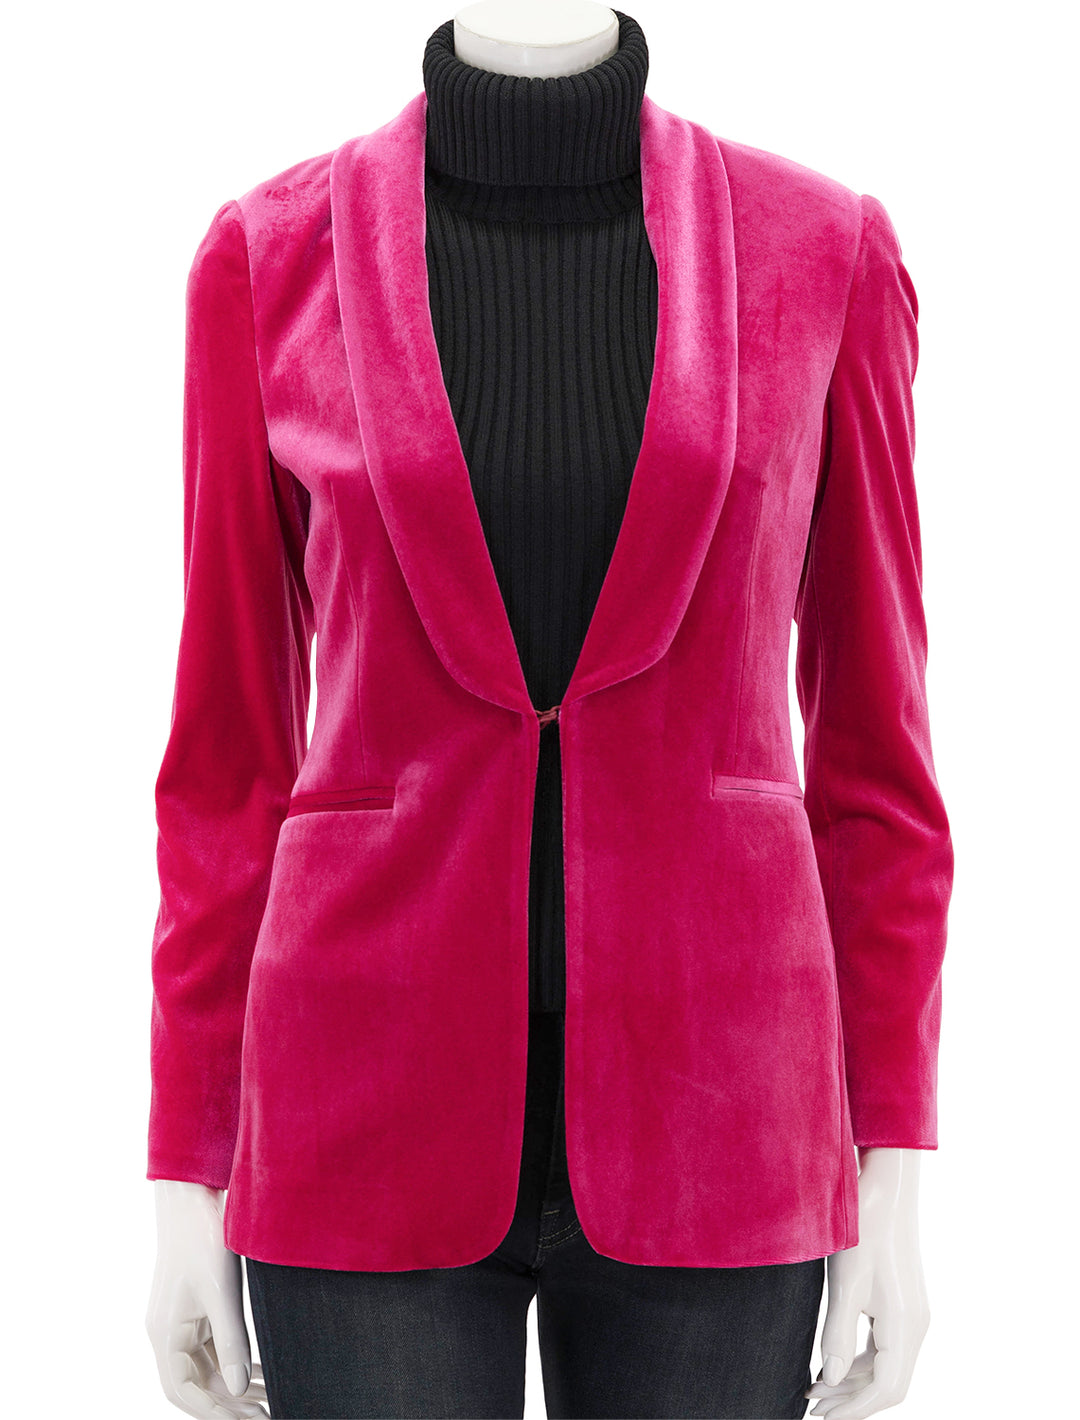 Front view of Vilagallo's pink velvet smoking jacket, clasped.